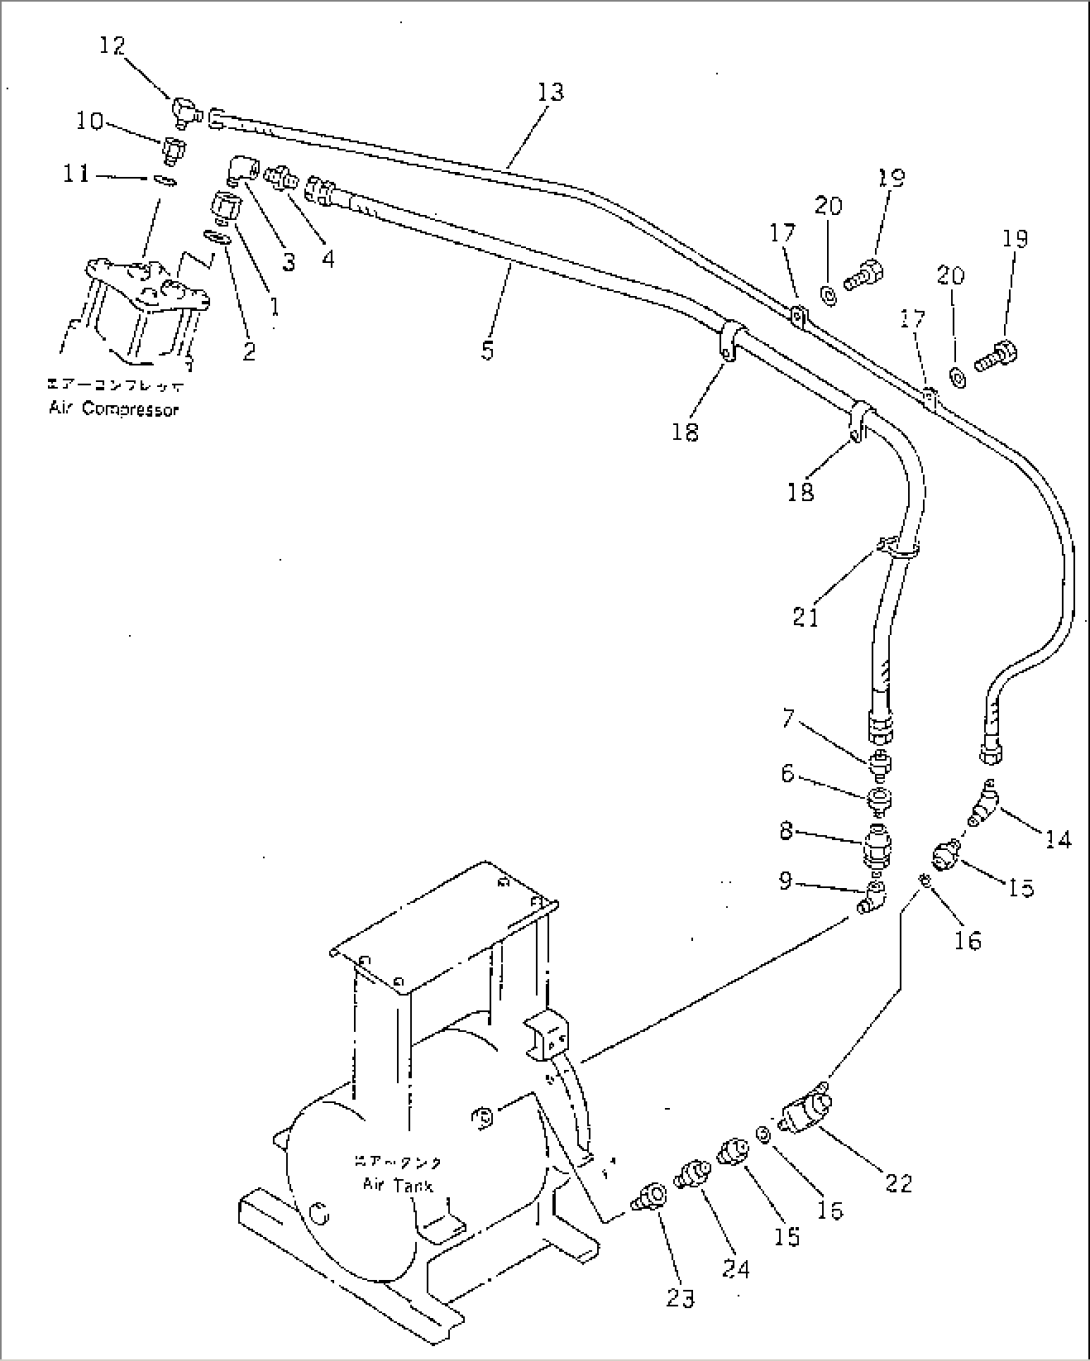 UPPER AIR PIPING (COMPRESSOR TO AIR TANK)(#1862-)